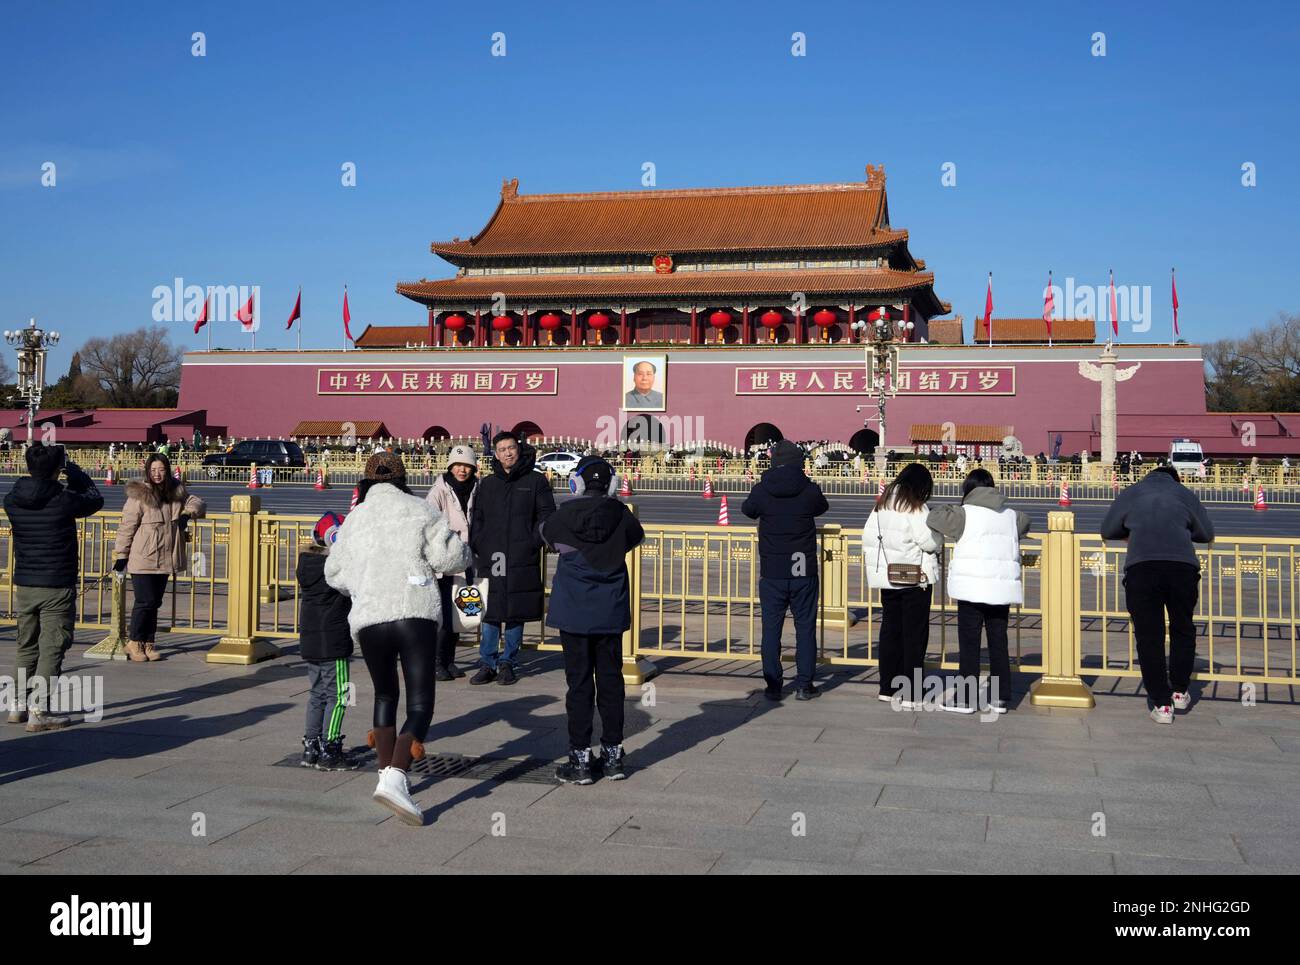 A photo shows Tiananmen Square (Tian'anmen Square) in Beijing, China on January 2, 2023. Lots of people visit the Tiananmen Square which contains the Monument to the People's Heroes, the Great Hall of the People, the National Museum of China, and the Mausoleum of Mao Zedong.( The Yomiuri Shimbun via AP Images ) Stock Photo